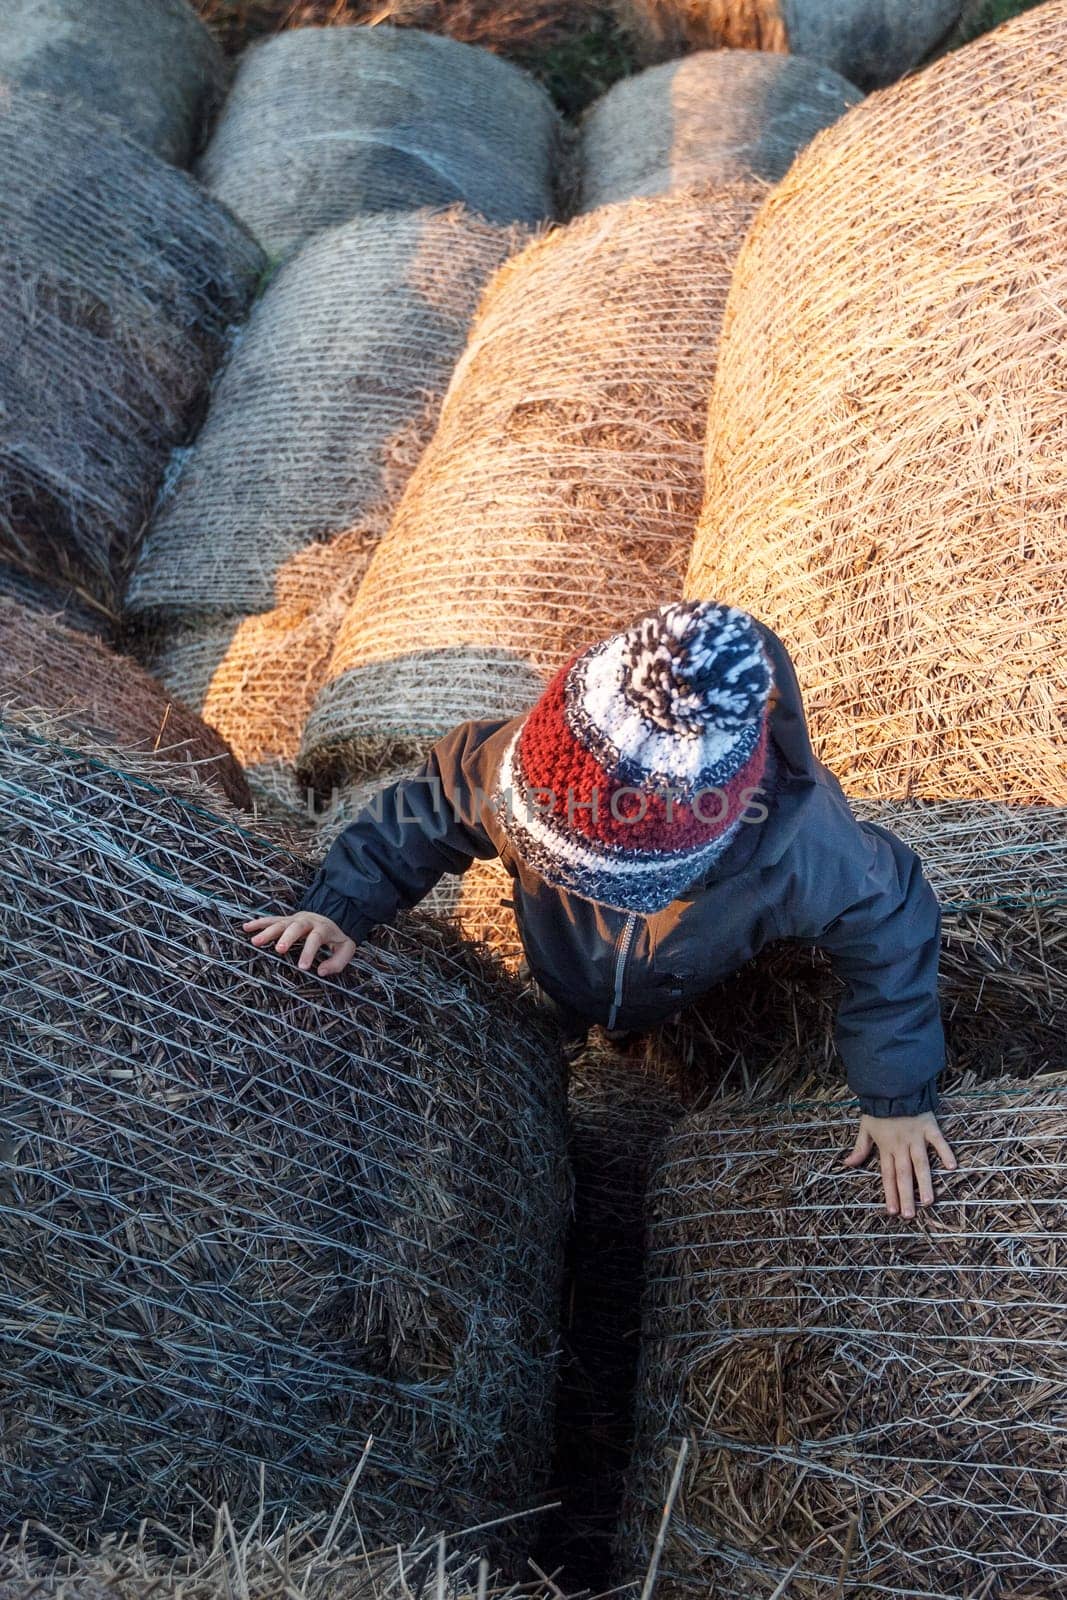 A cute boy with a knitted hat climbs to the top of a pile of straw bales.